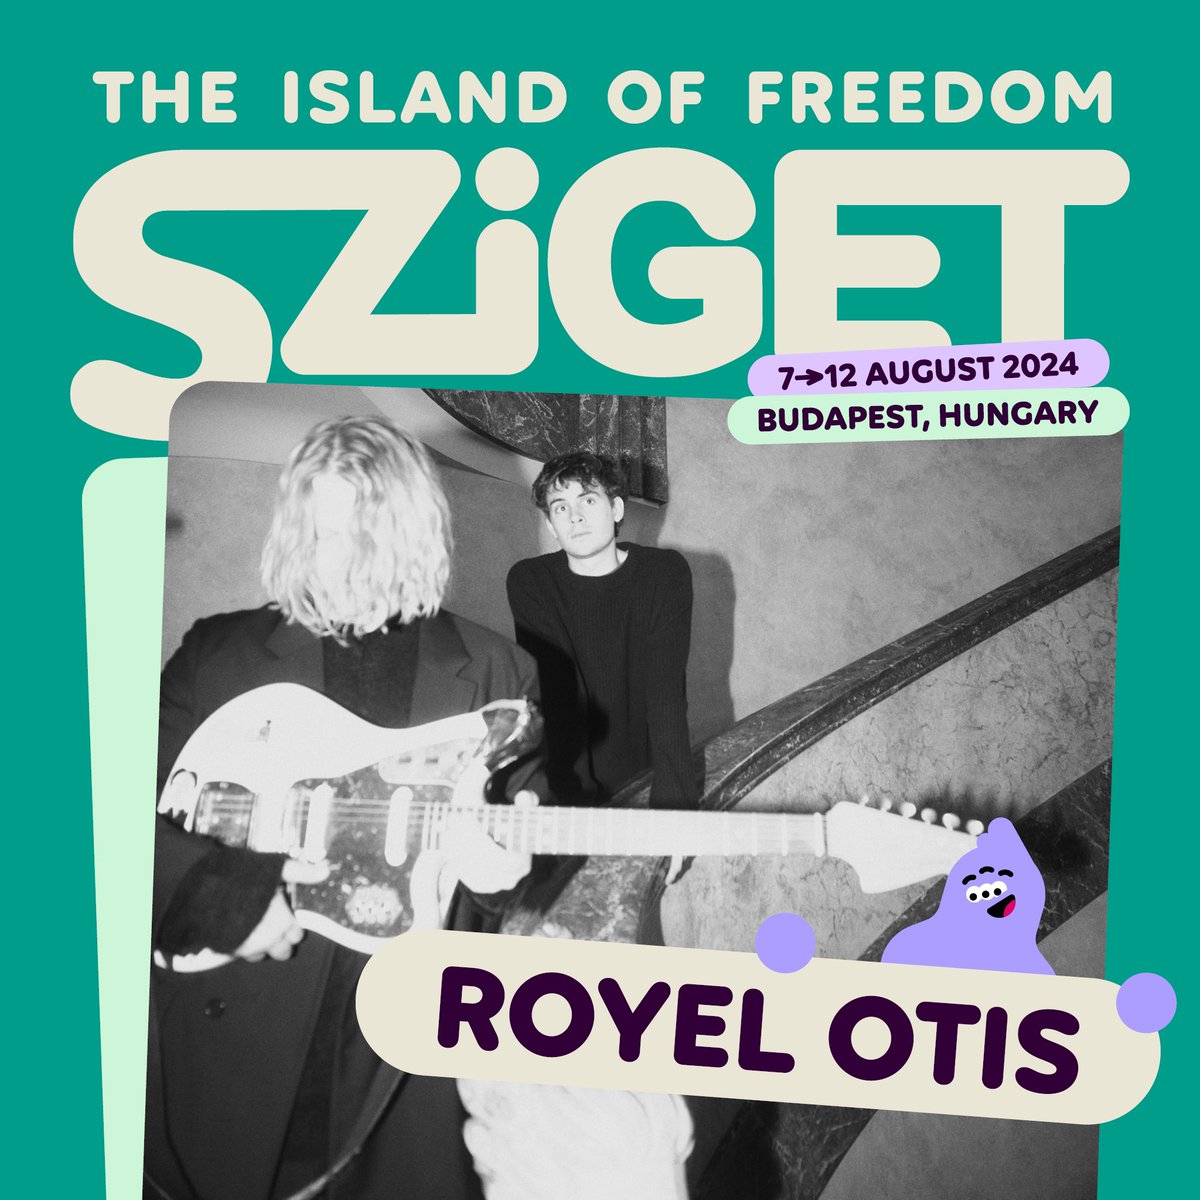 Hungary! Frothing to play at @szigetofficial this August #SZIGET2024